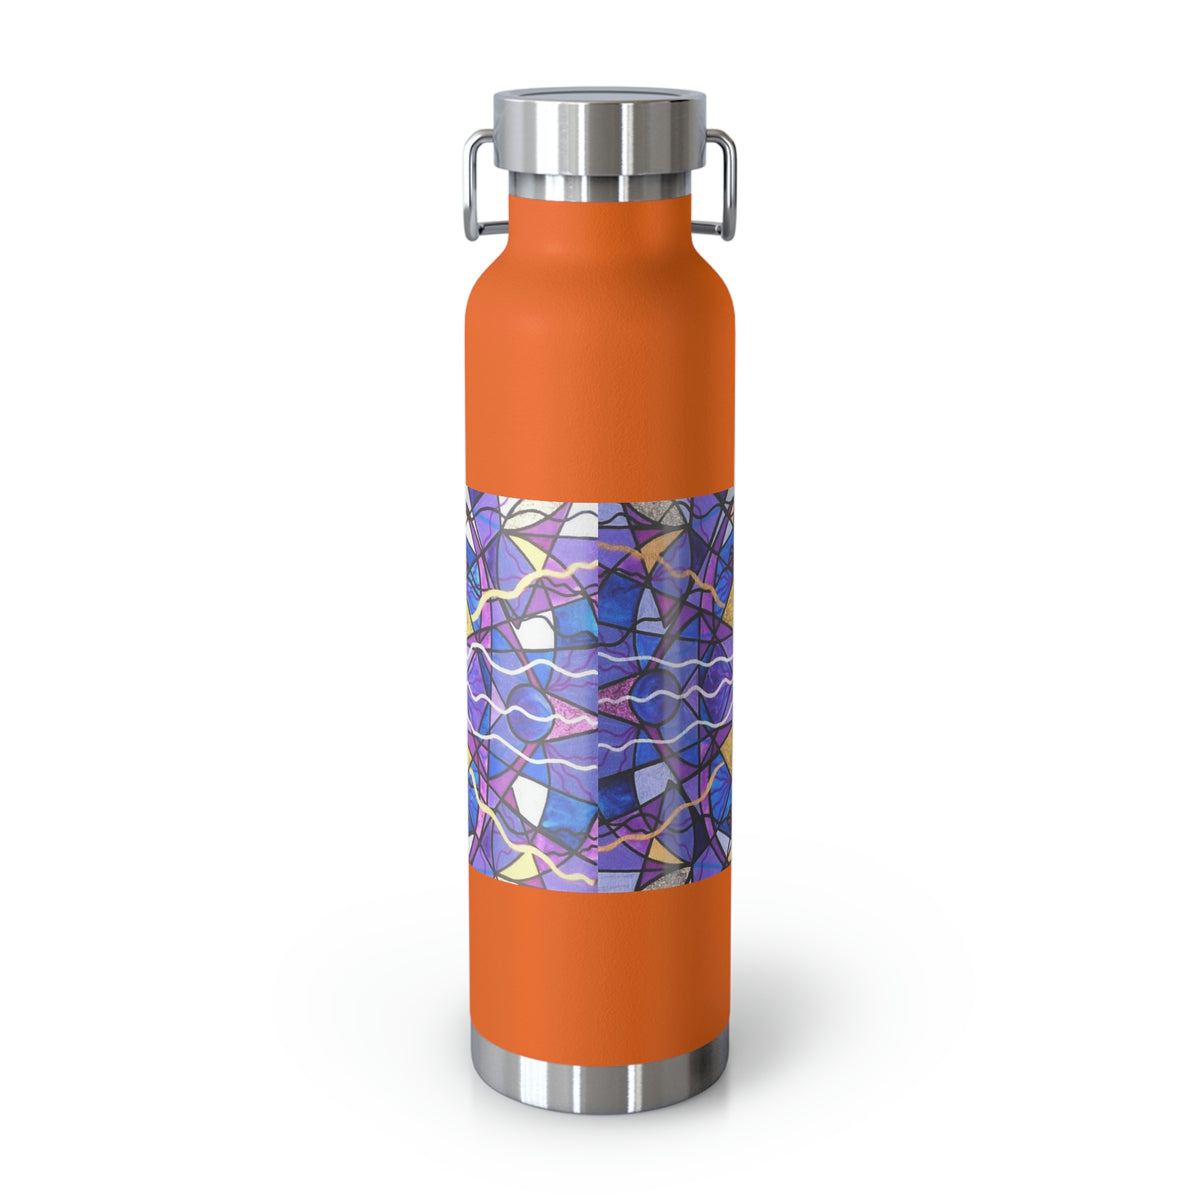 Pineal Opening - Copper Vacuum Insulated Bottle, 22oz